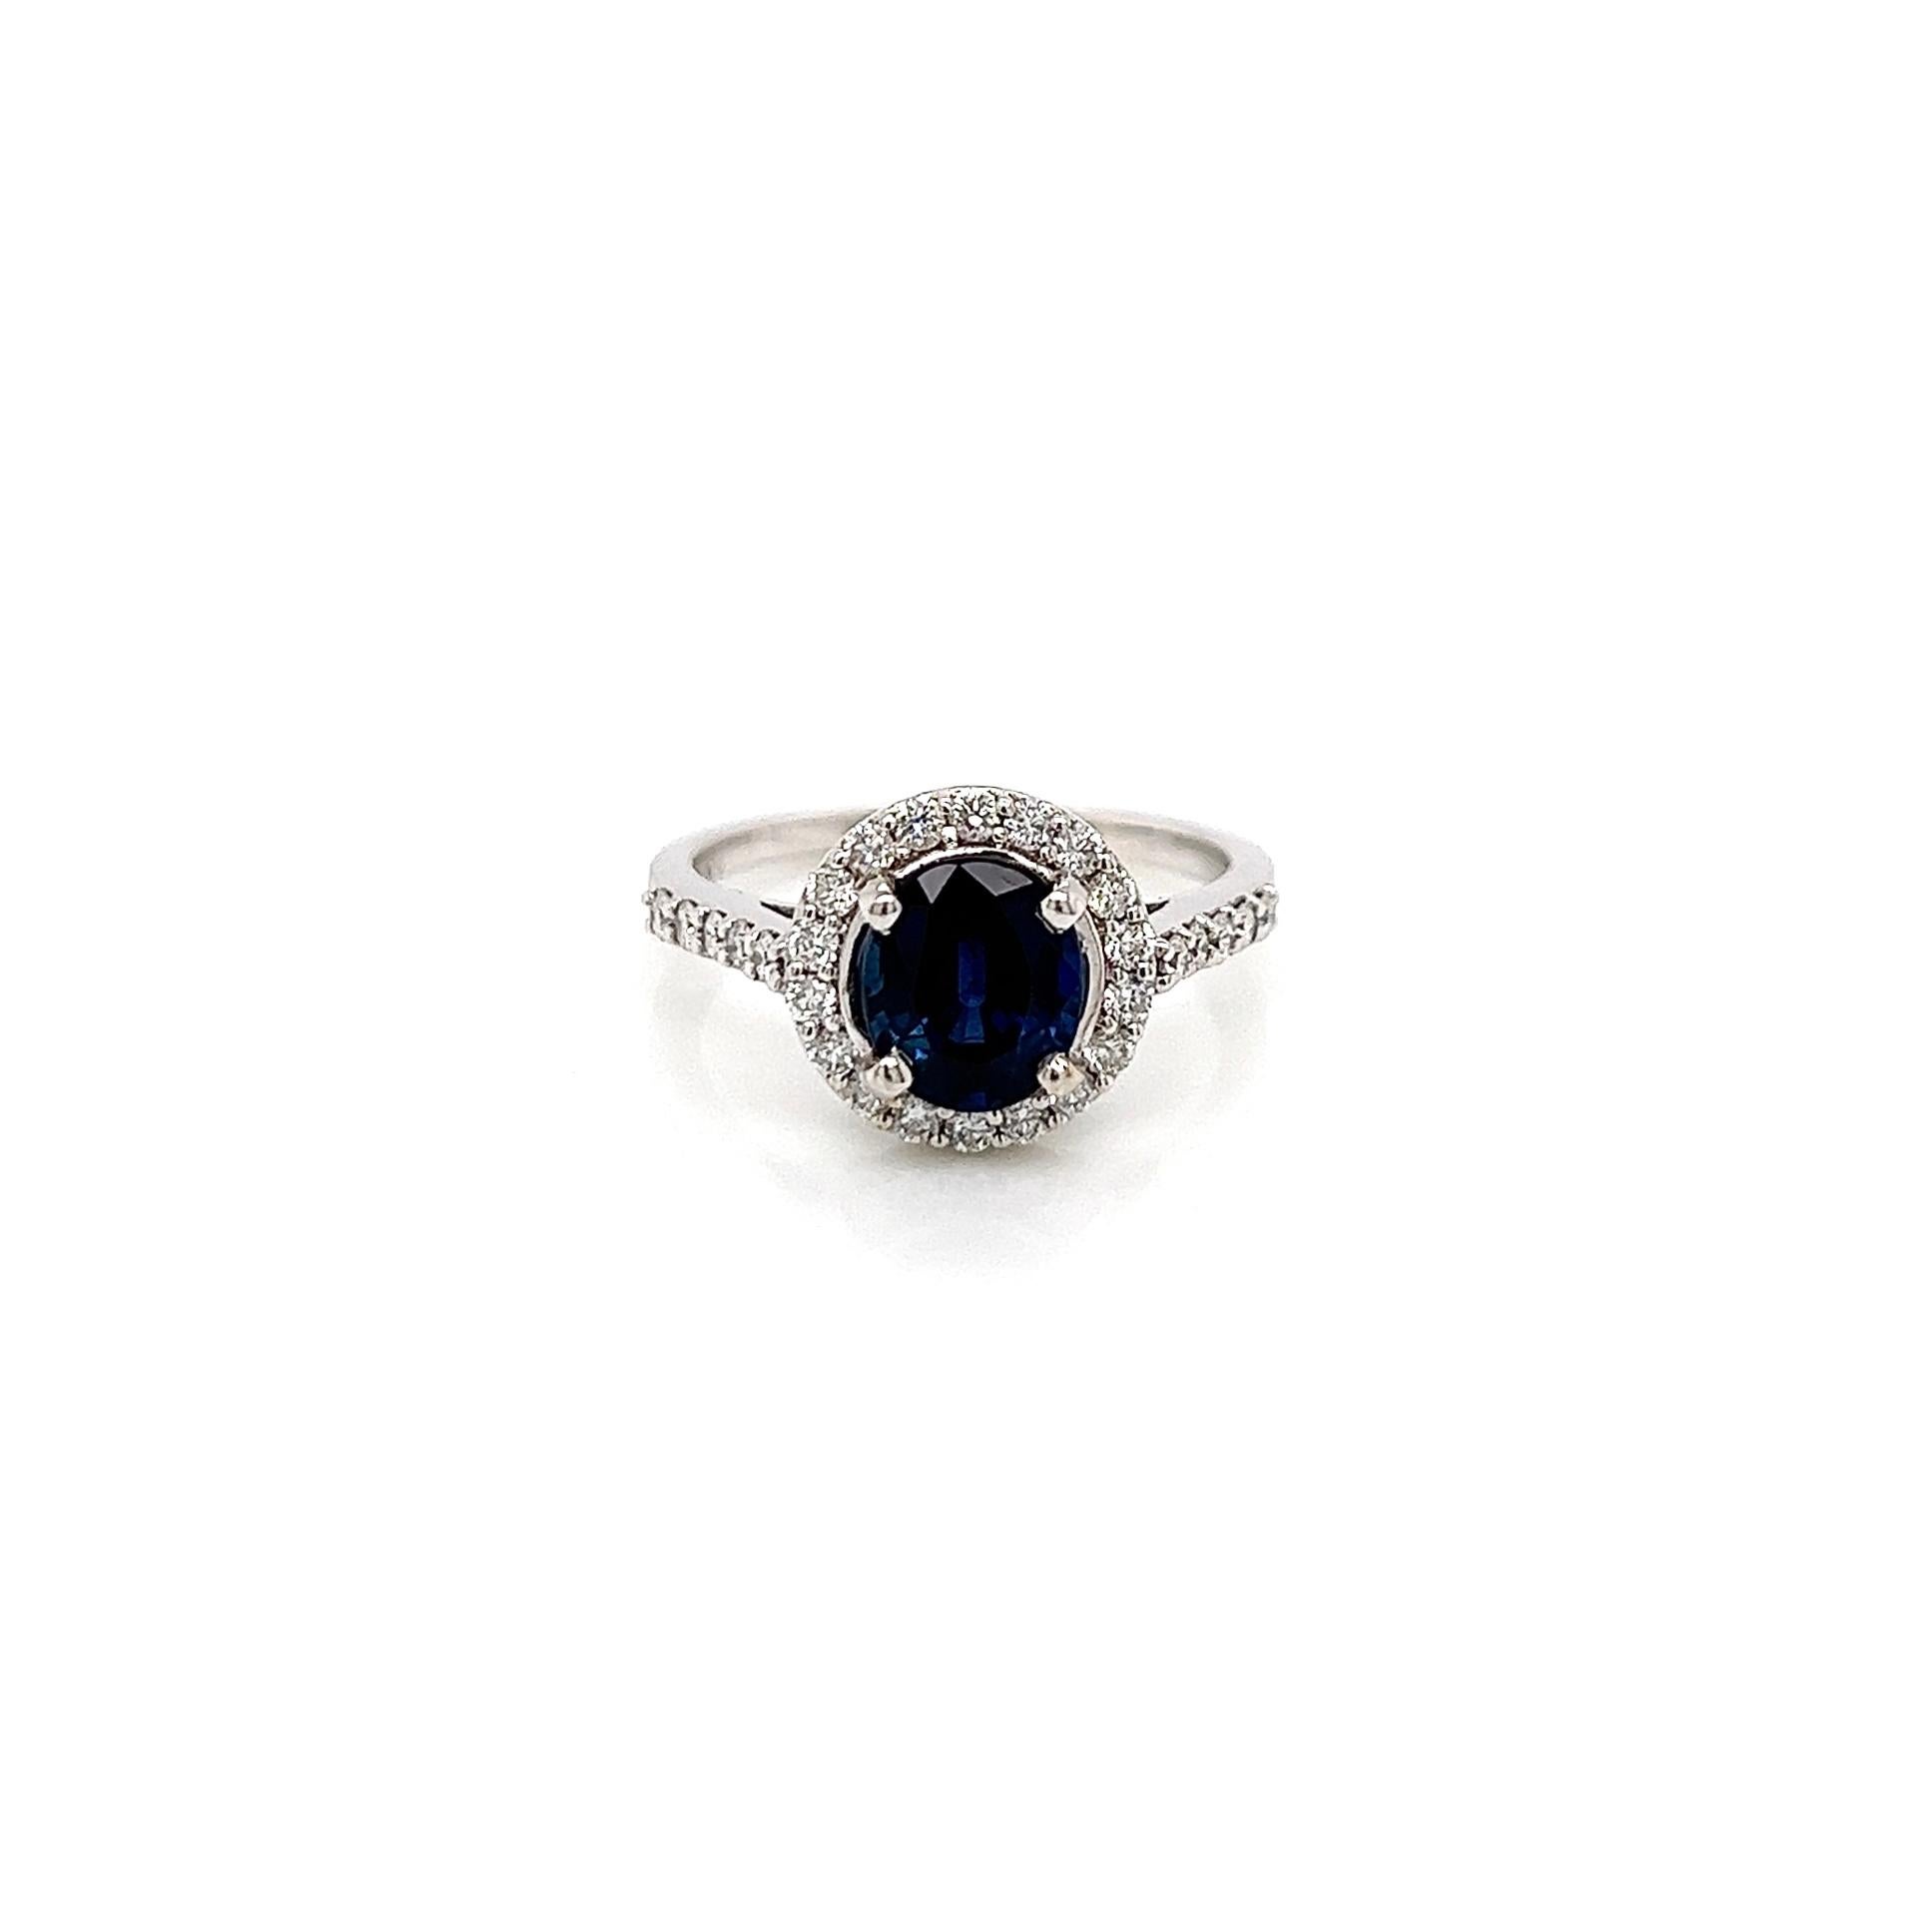 2.03 Total Carat Sapphire Diamond Halo Ladies Ring

Make her feel special with this beautiful Engagement Ring featuring sapphire in the center. After all this is SEA Wave Diamonds and we stand behind our very special hue: blue! True royal blue color